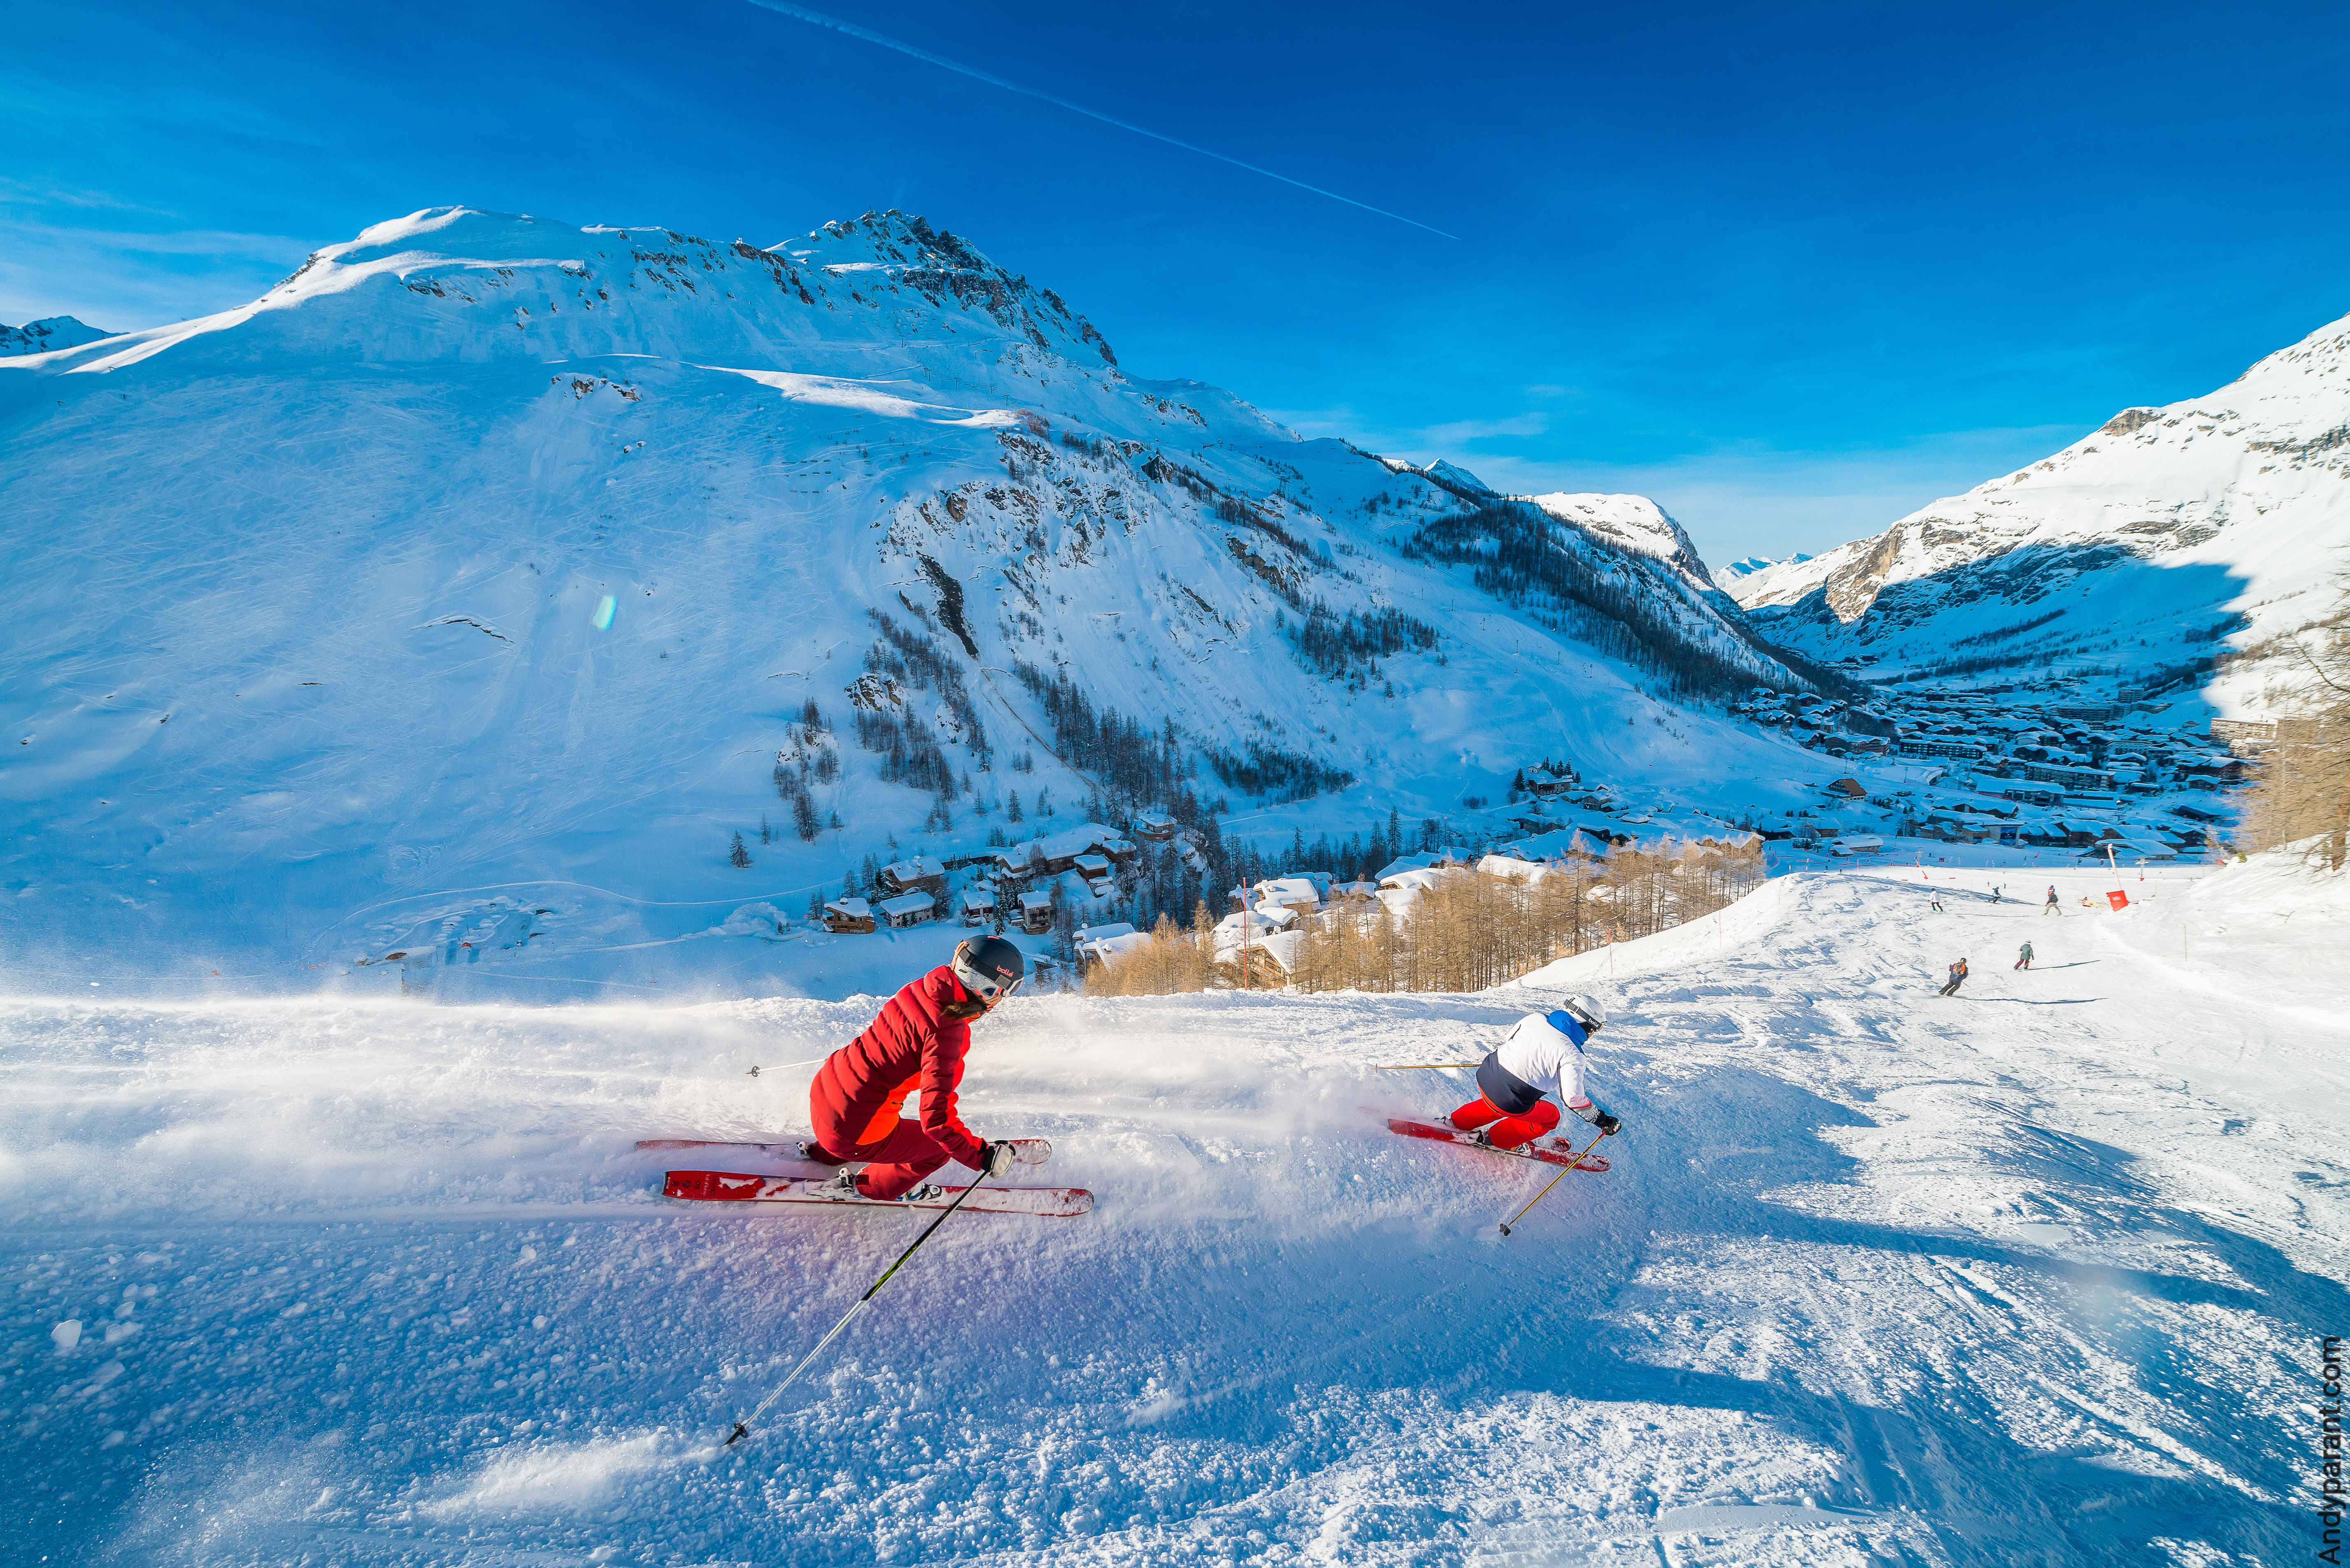 How to keep in shape on your ski holiday